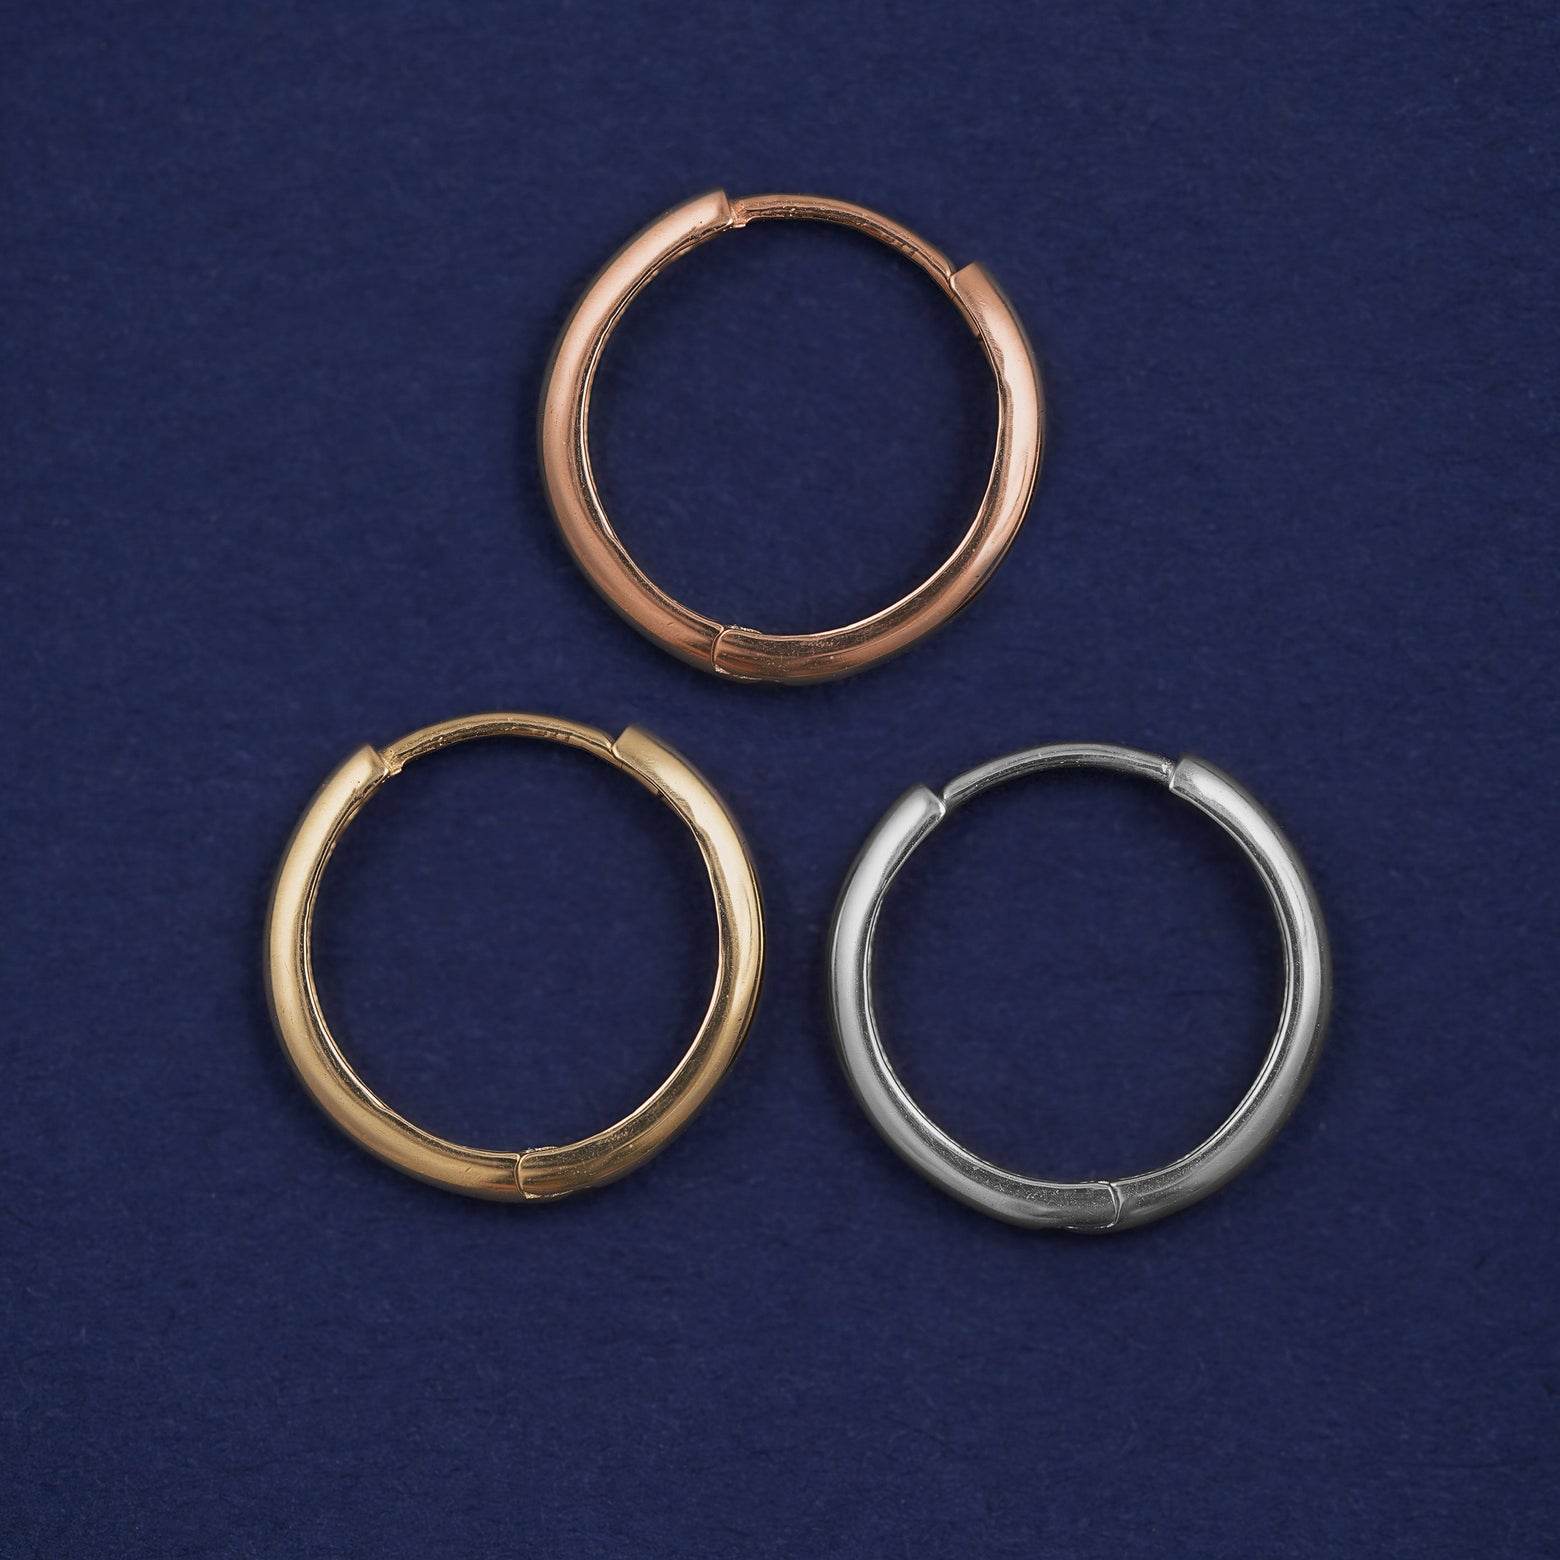 Three versions of the Medium Curvy Huggie Hoop shown in options of rose, yellow, and white gold